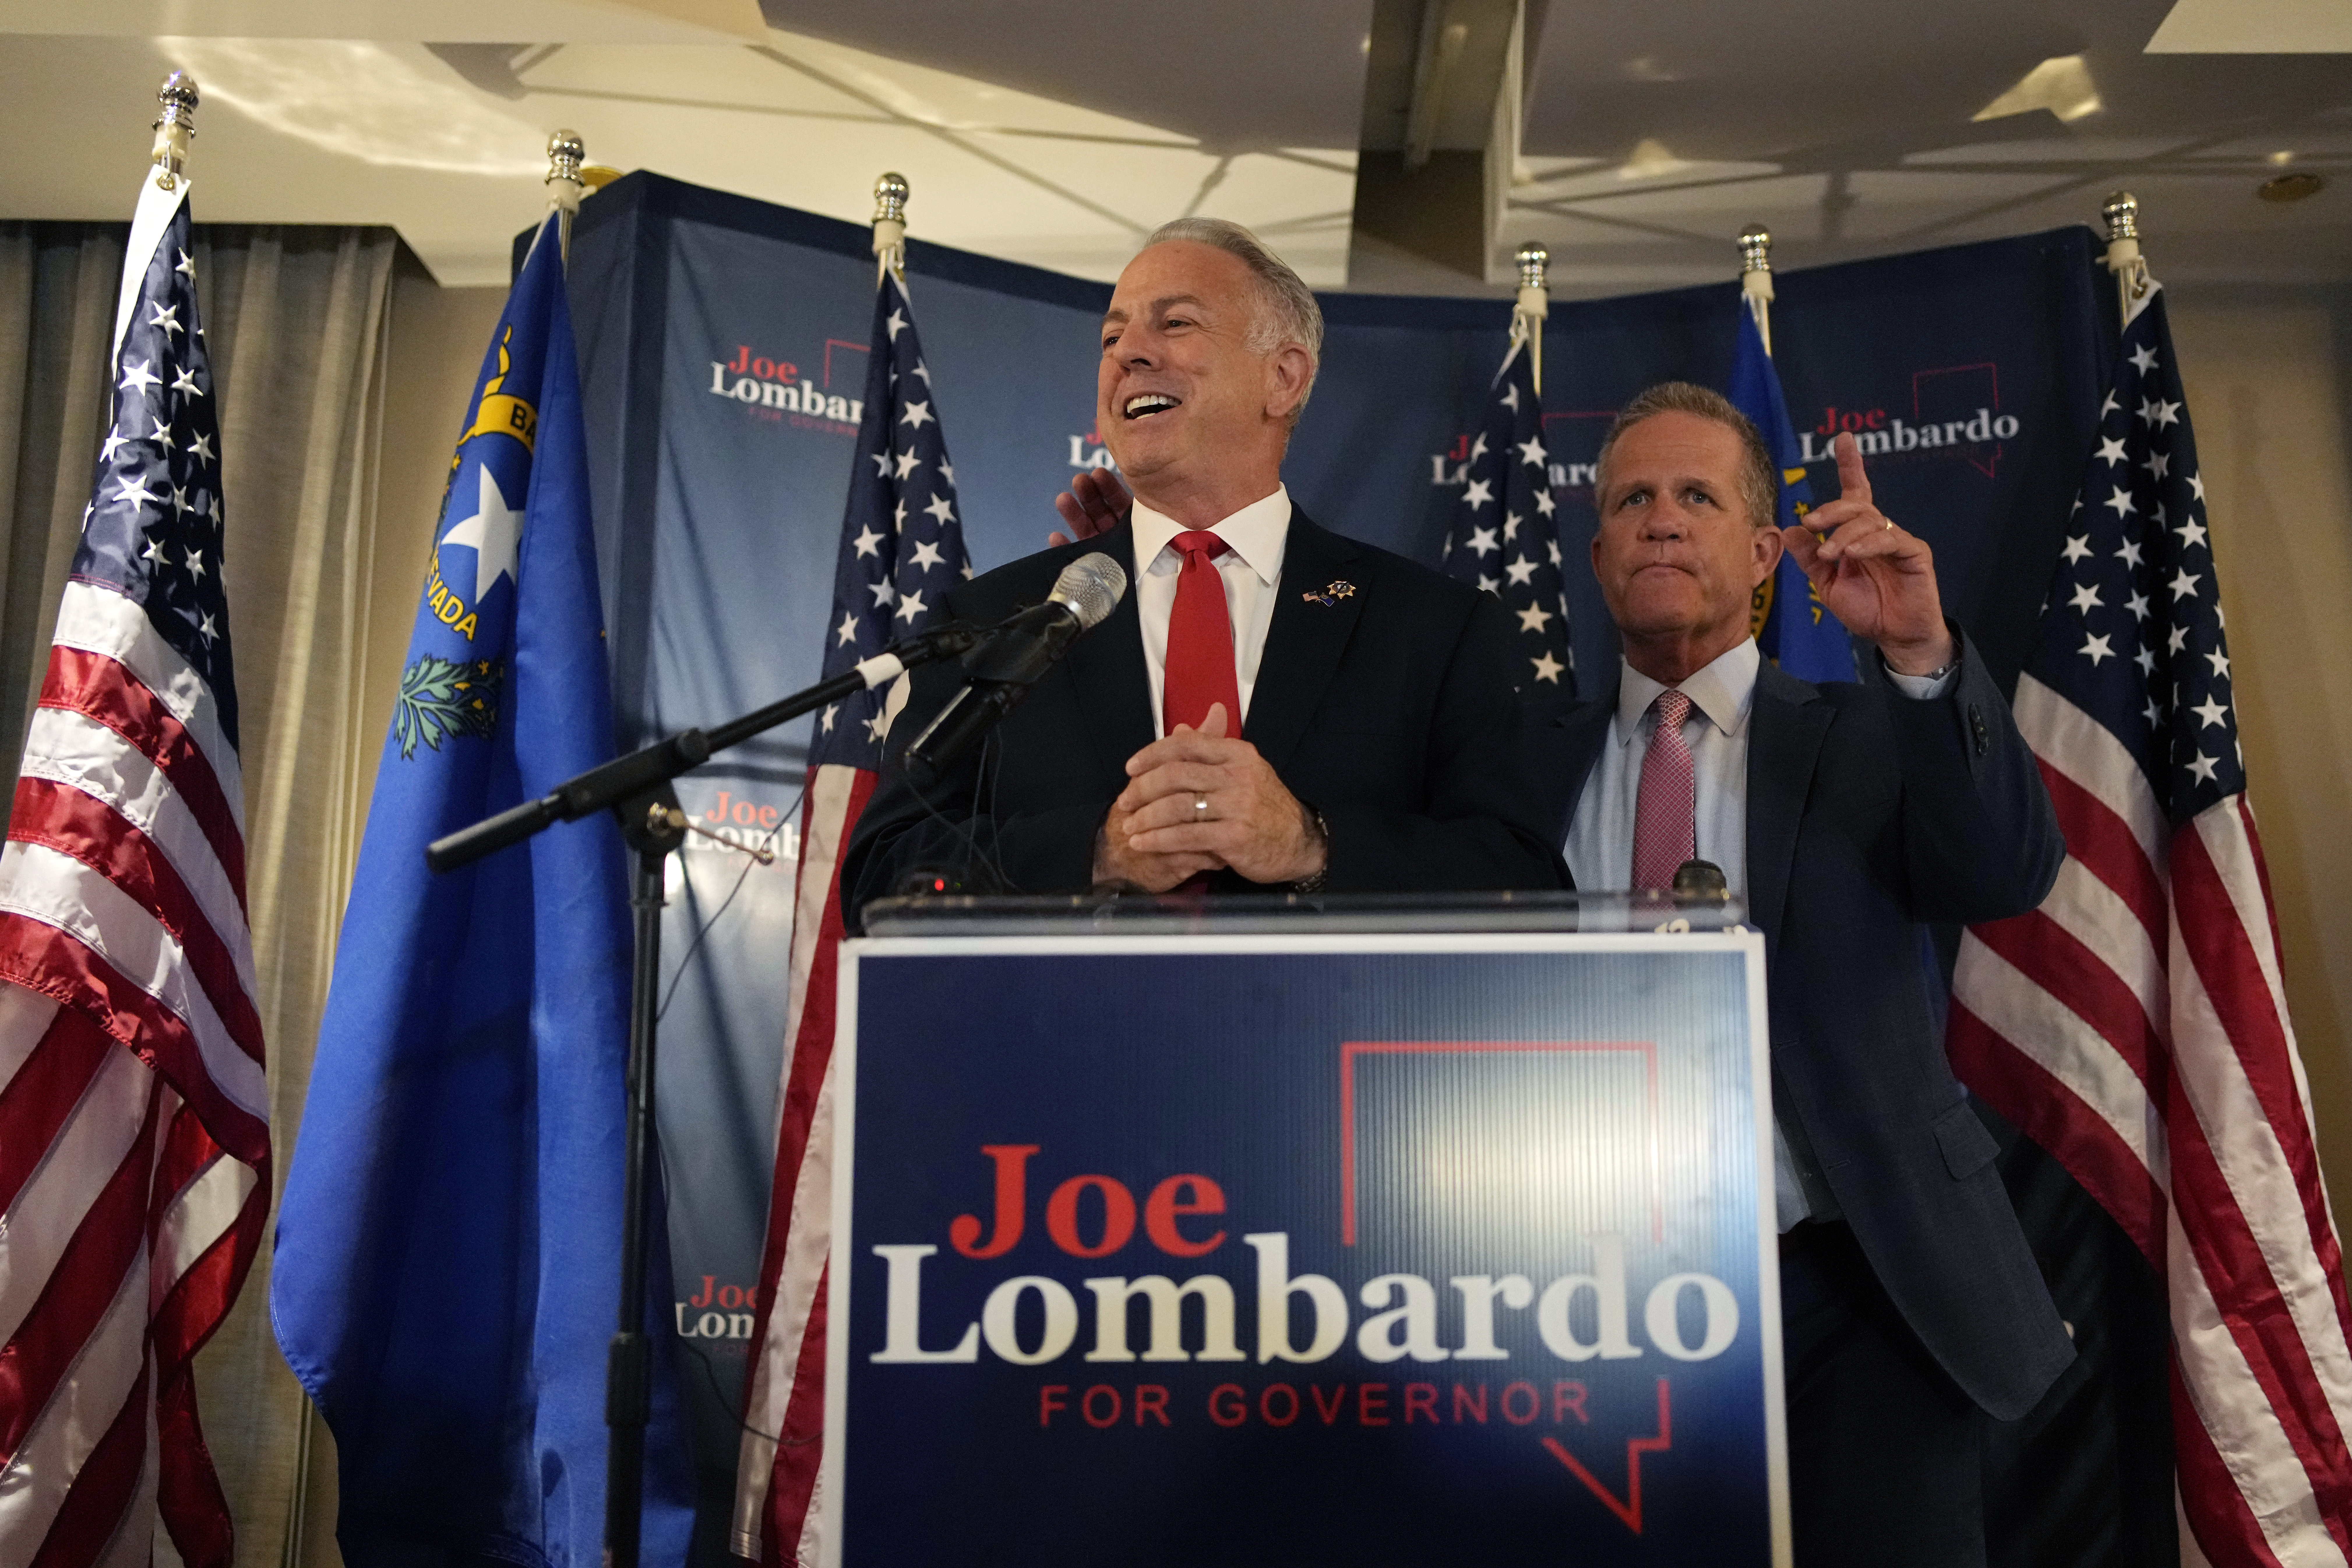 Clark County Sheriff and Republican candidate for Nevada governor Joe Lombardo speaks at an election night party Tuesday, June 14, 2022, in Las Vegas. (AP Photo/John Locher)